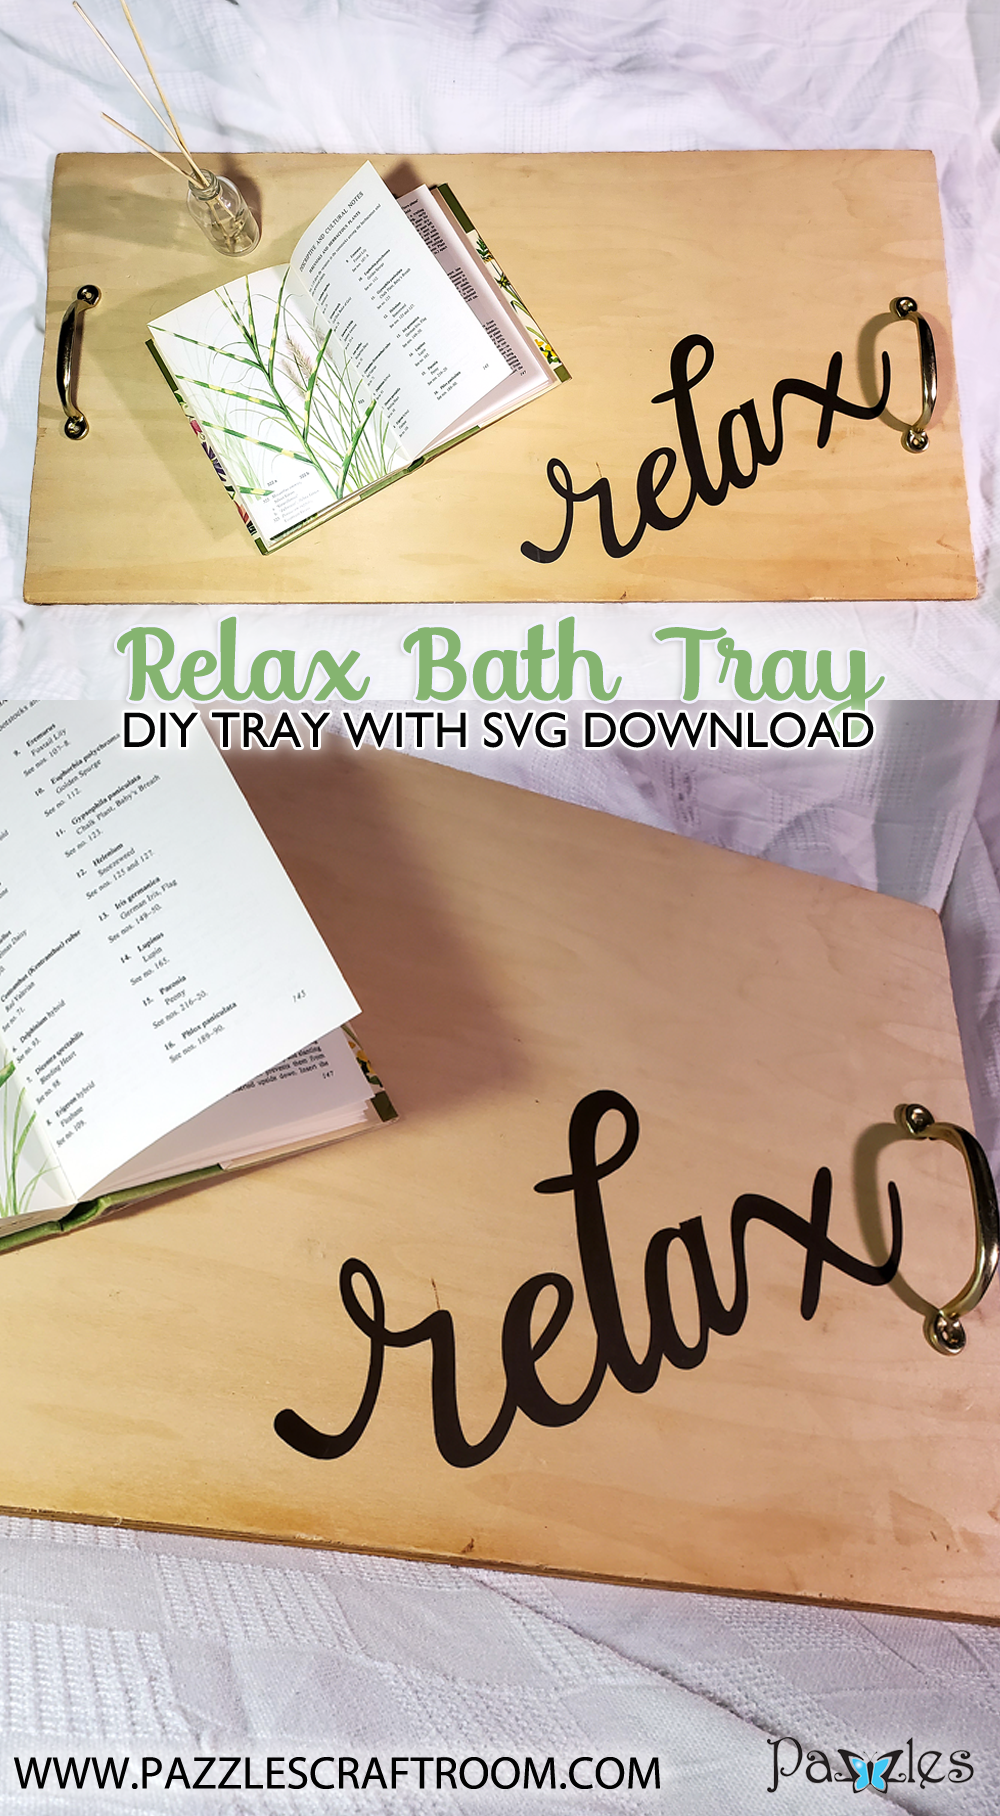 Pazzles DIY Relax Bath Tray with instant SVG download. Compatible with all major electronic cutters including Pazzles Inspiration, Cricut, and Silhouette Cameo. Design by Renee Smart.